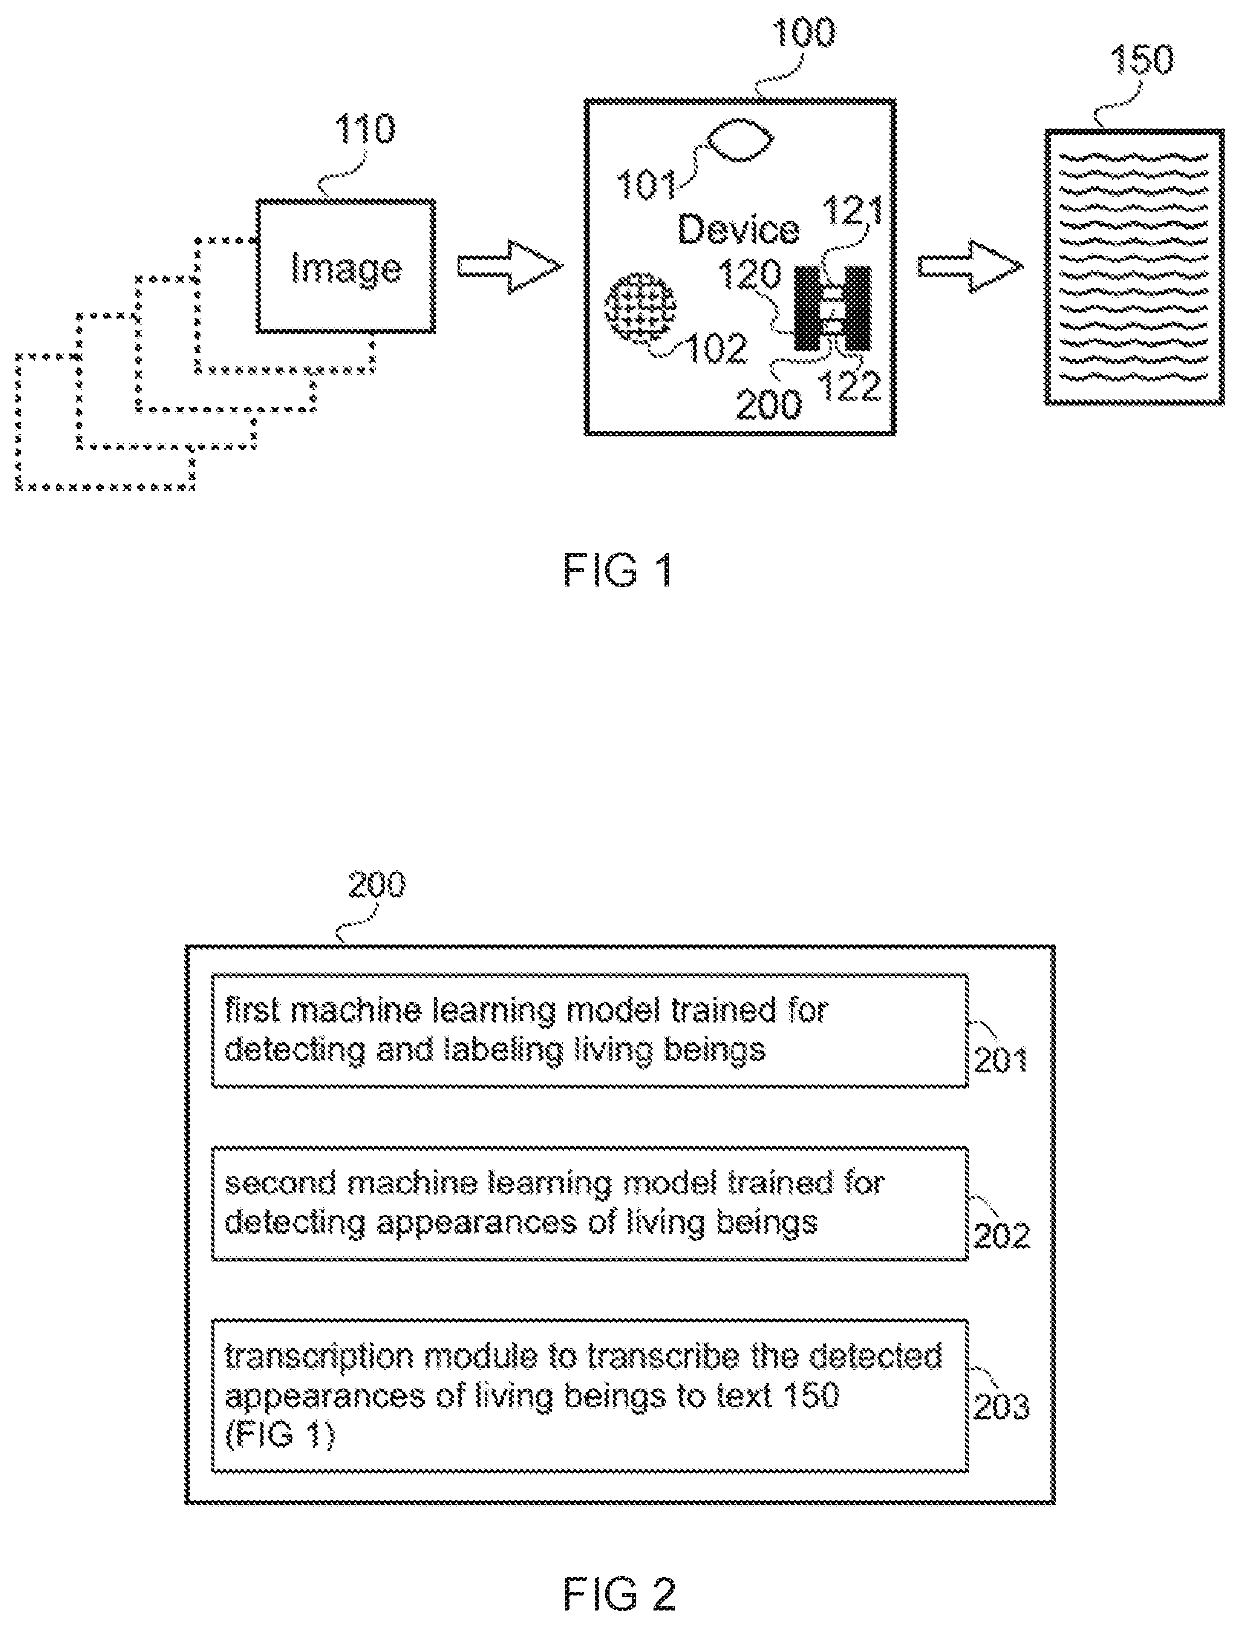 A medical device for transcription of appearances in an image to text with machine learning